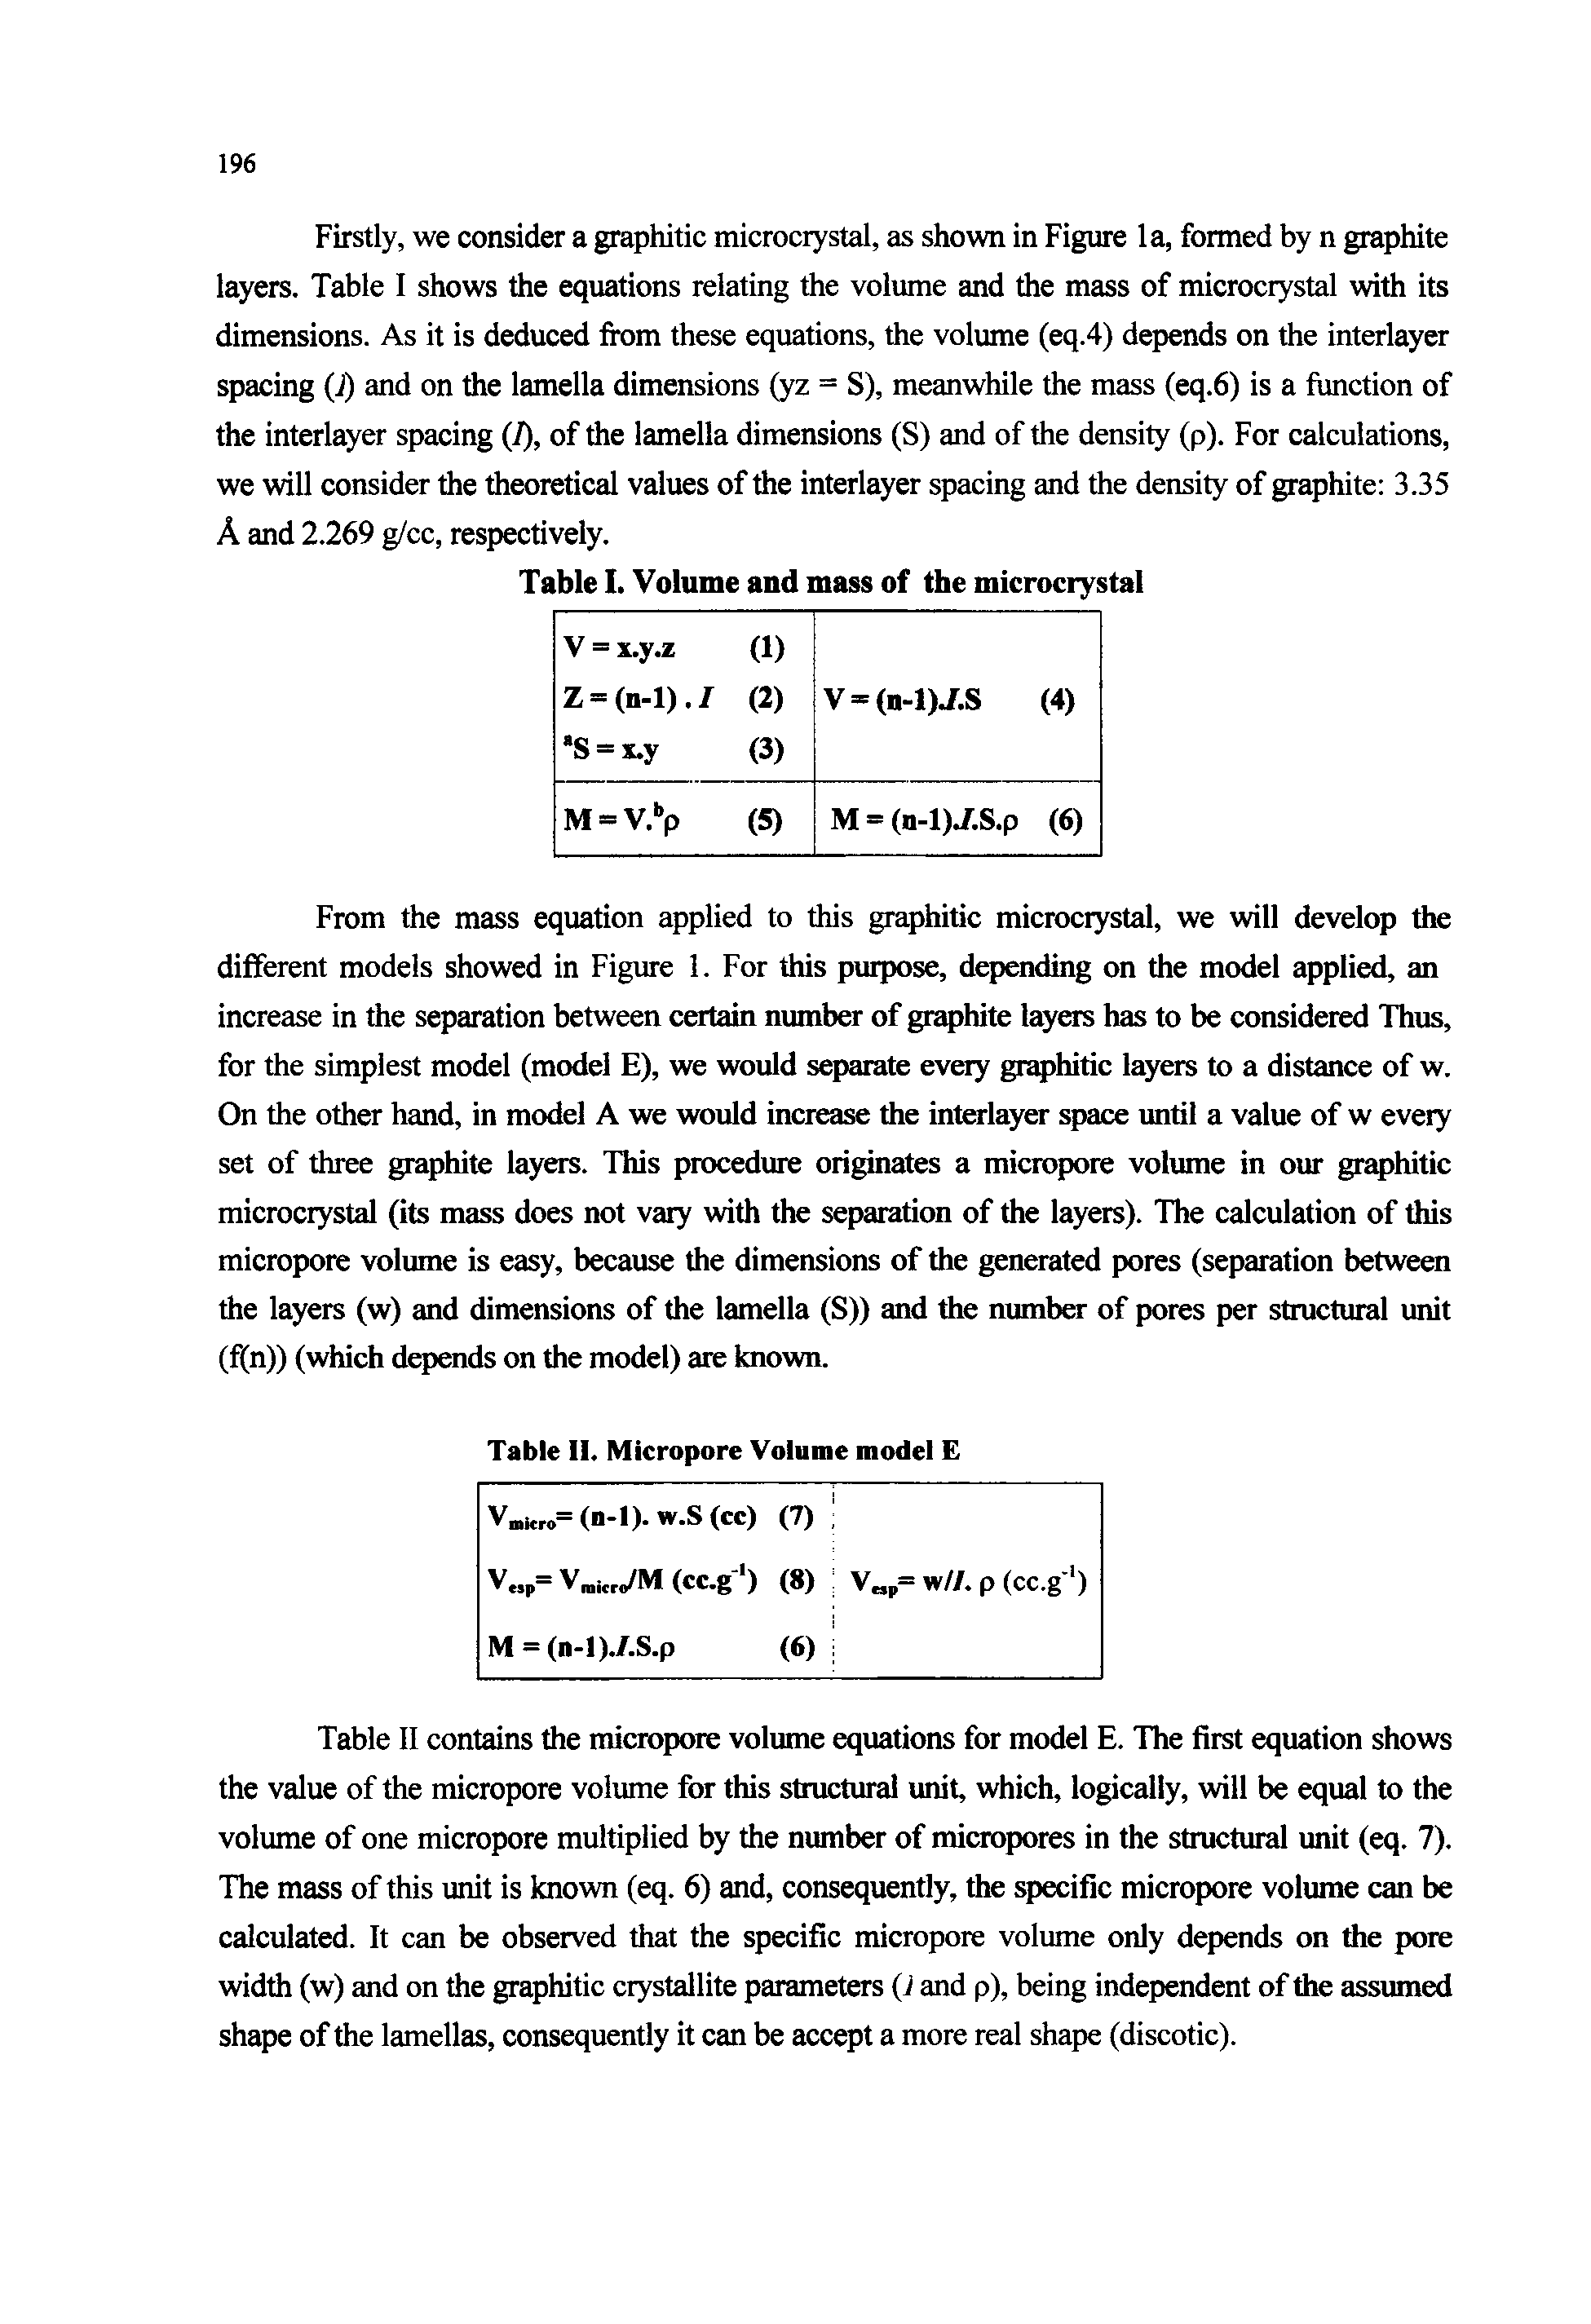 Table II contains the micropore volume equations for model E. The first equation shows the value of the micropore volume for this structural unit, which, logically, will be equal to the volume of one micropore multiplied by the number of micropores in the structural unit (eq. 7). The mass of this unit is known (eq. 6) and, consequently, the specific micropore volume can be calculated. It can be observed that the specific micropore volume only depends on the pore width (w) and on the graphitic crystallite parameters (J and p), being independent of the assumed shape of the lamellas, consequently it can be accept a more real shape (discotic).